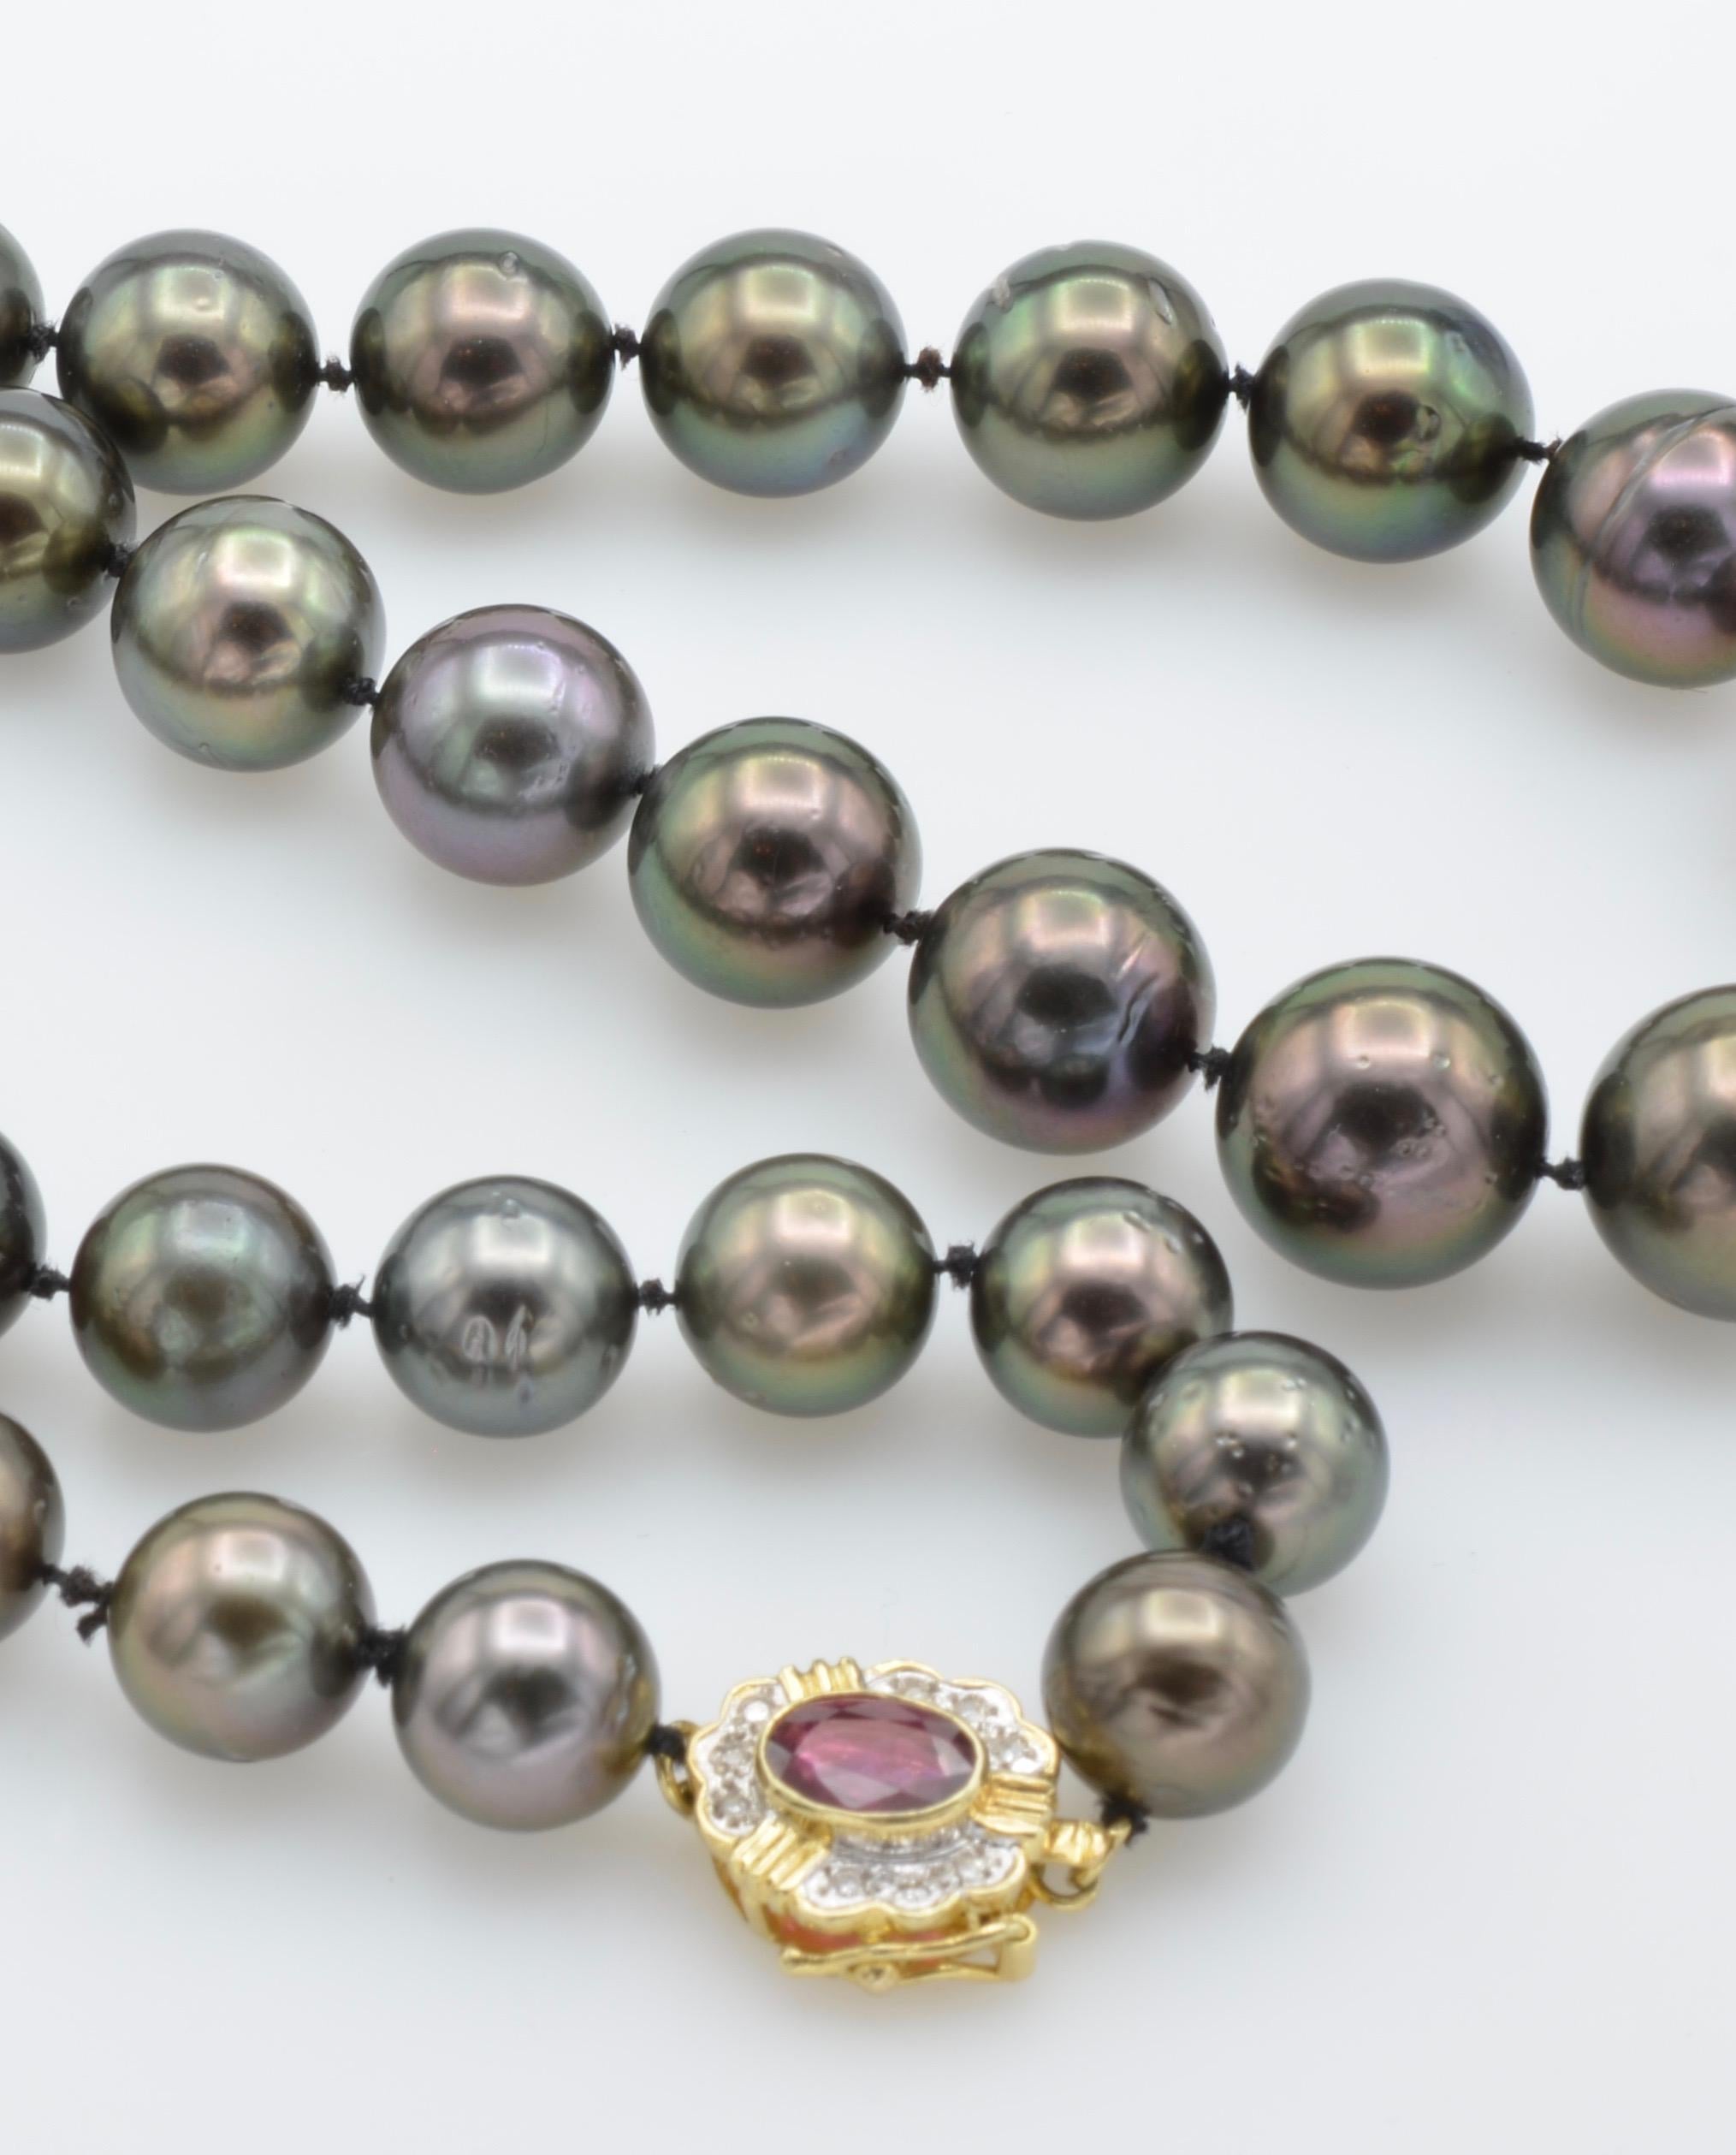 Modernist Black Tahiti Pearl Necklace with Ruby and Diamond Clasp